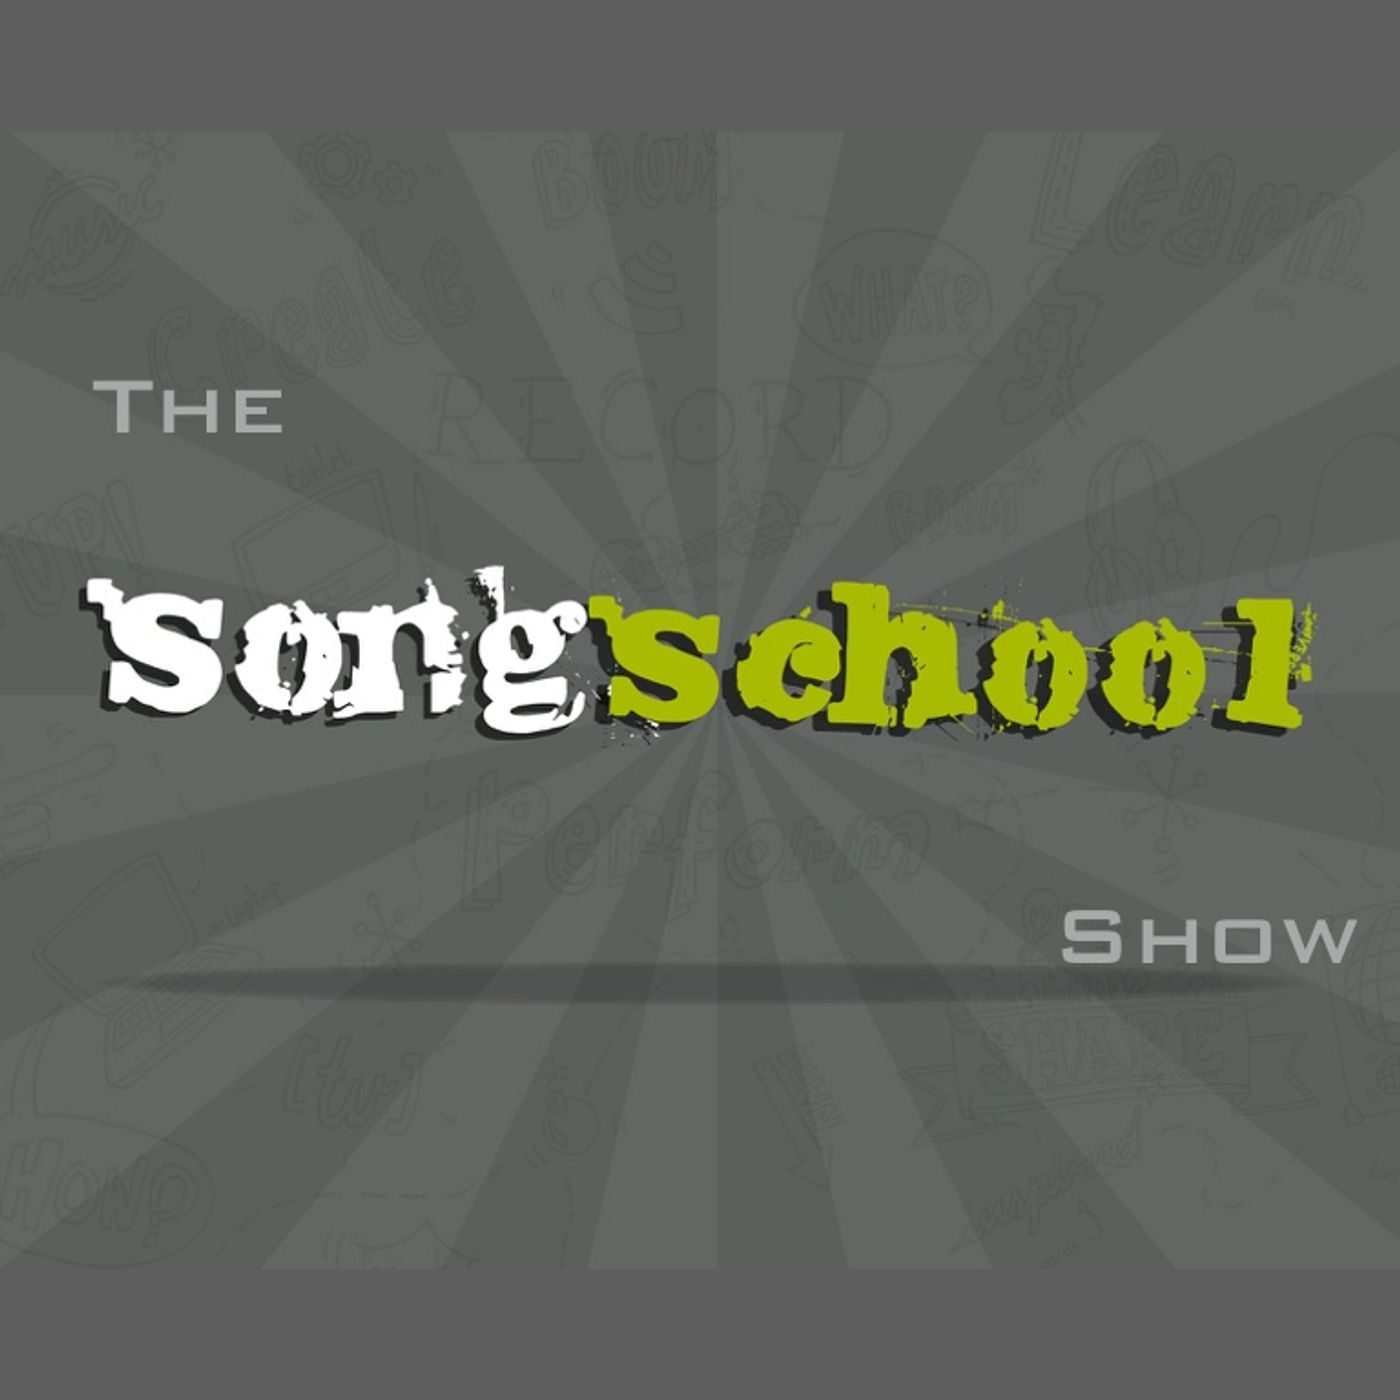 The Songschool Show @ St. Mary's Drogheda